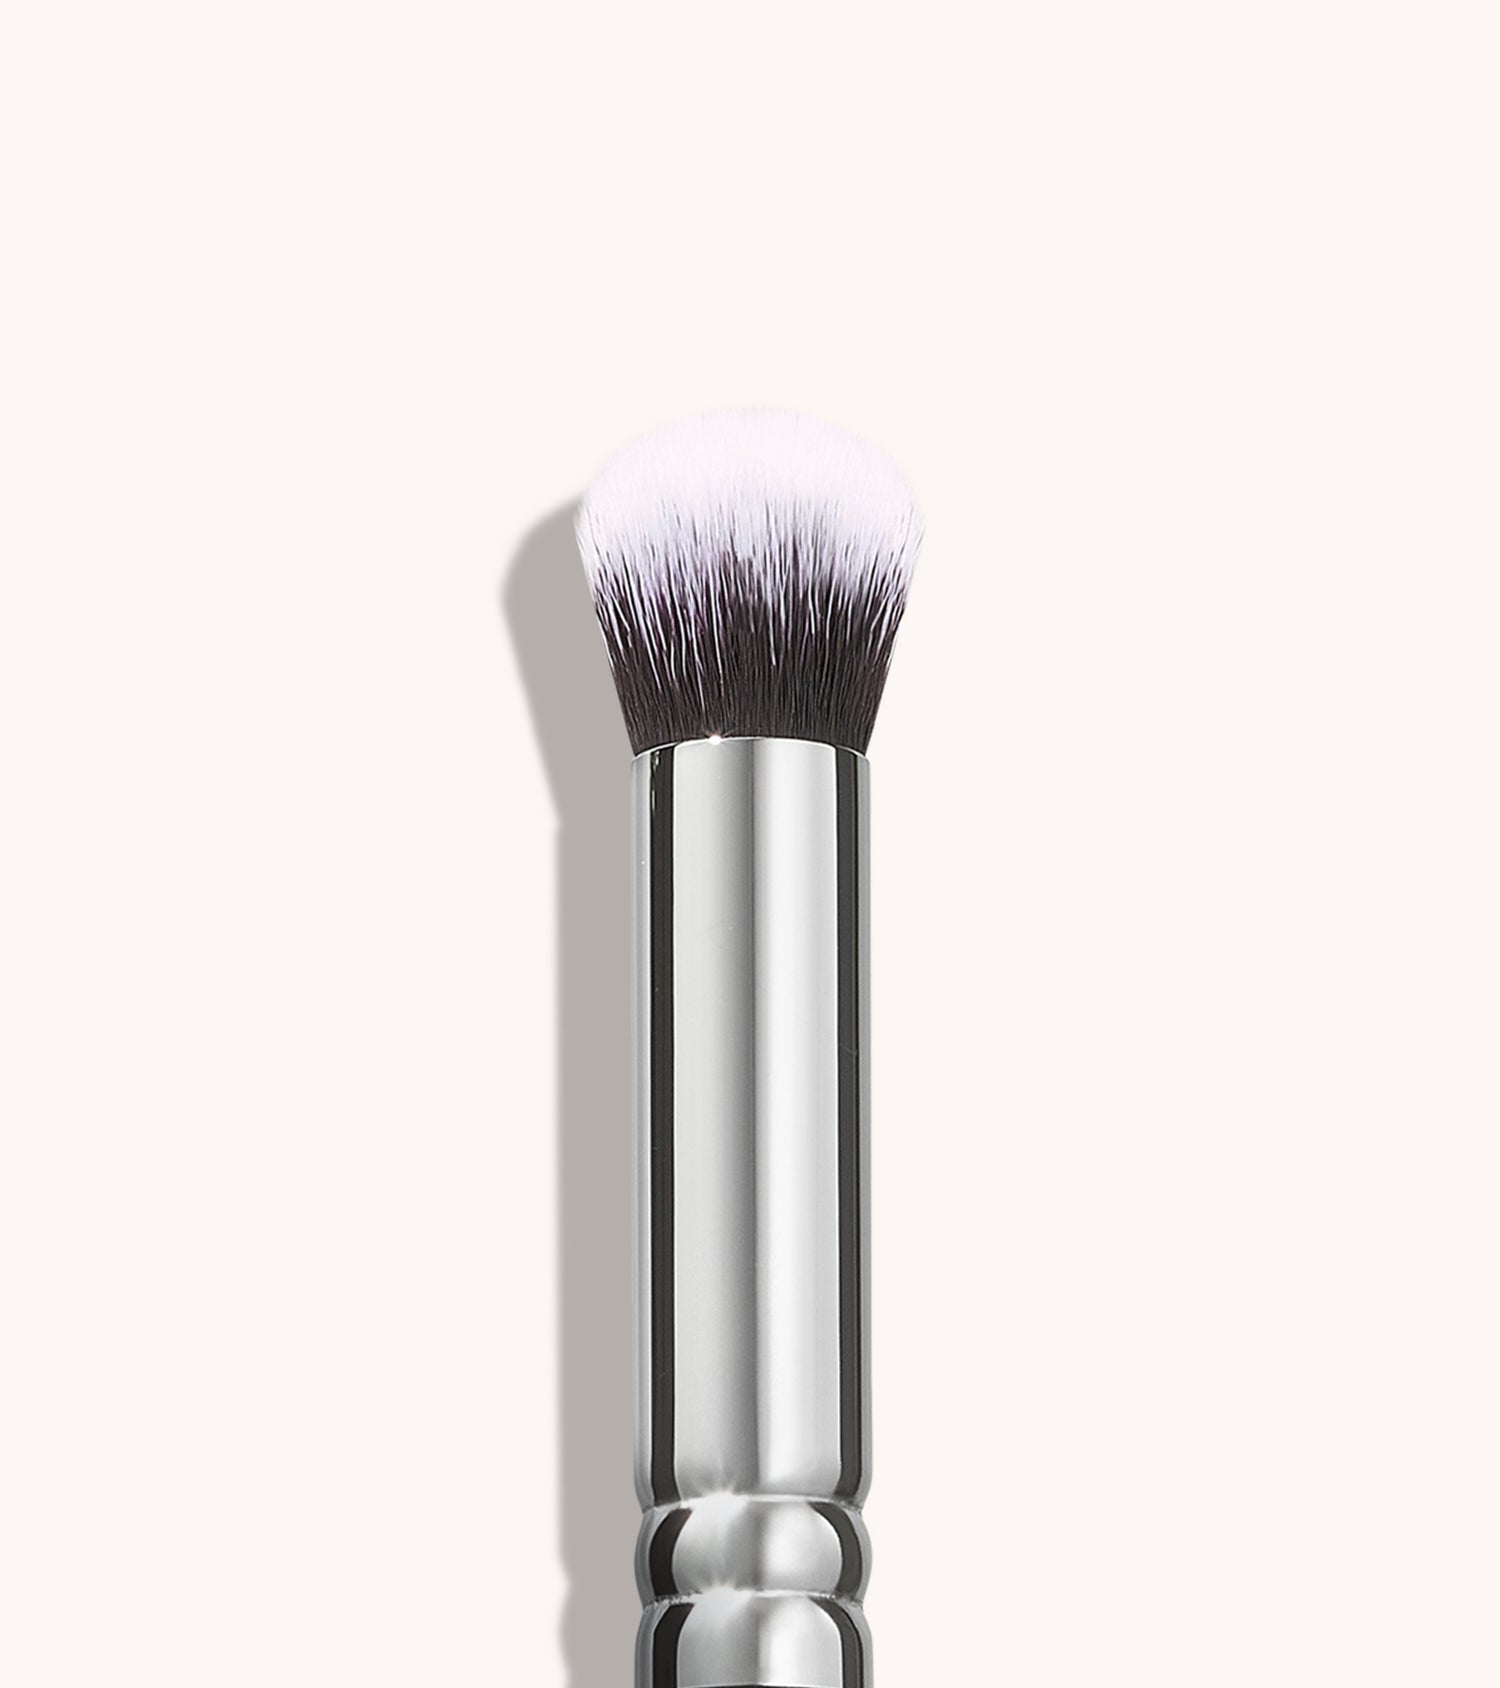 ZOEVA - 142 Concealer Buffer Pinsel (Champagne) - FACE BRUSH